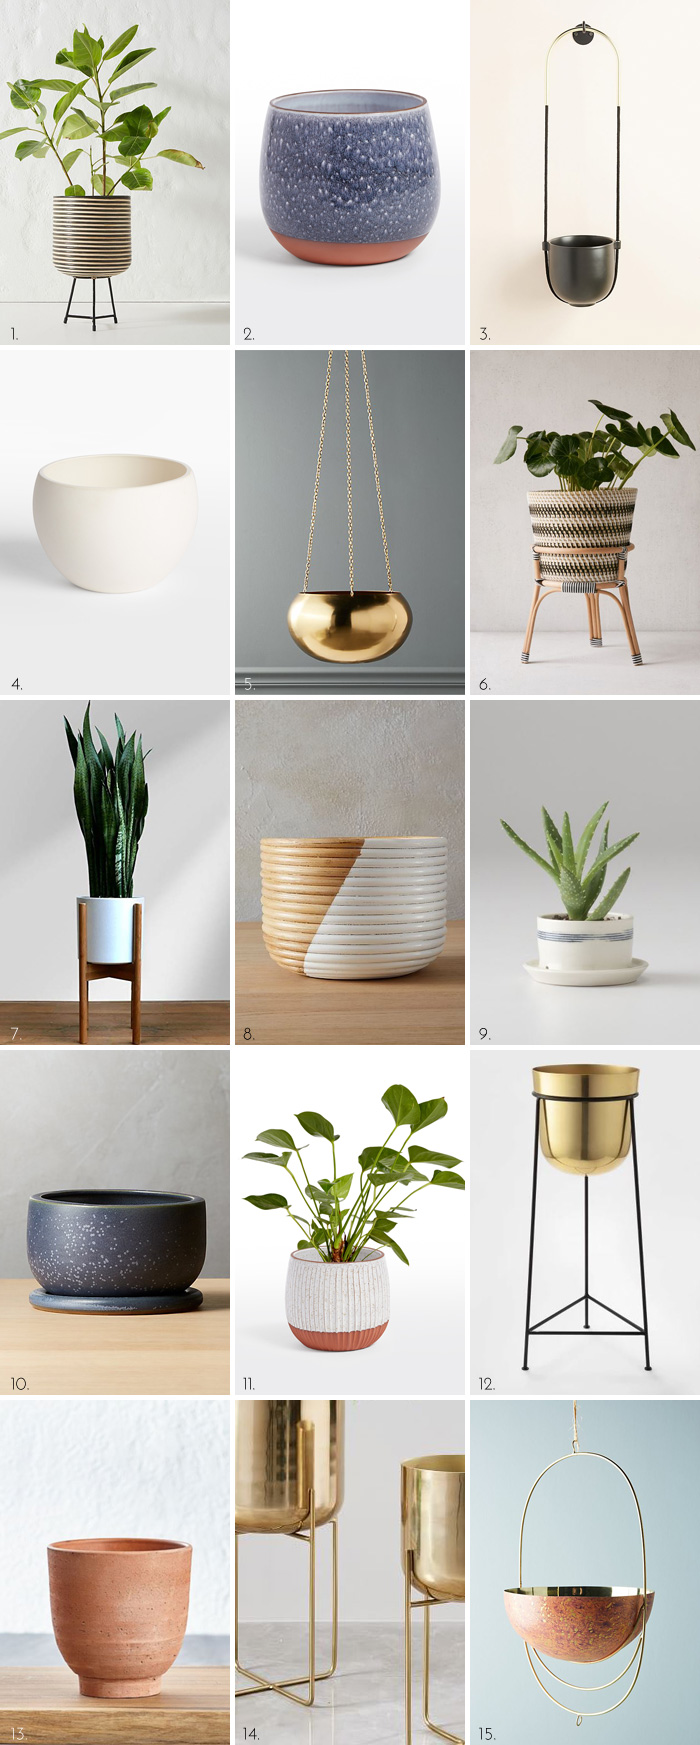 15 Chic Indoor Planters for Your Home